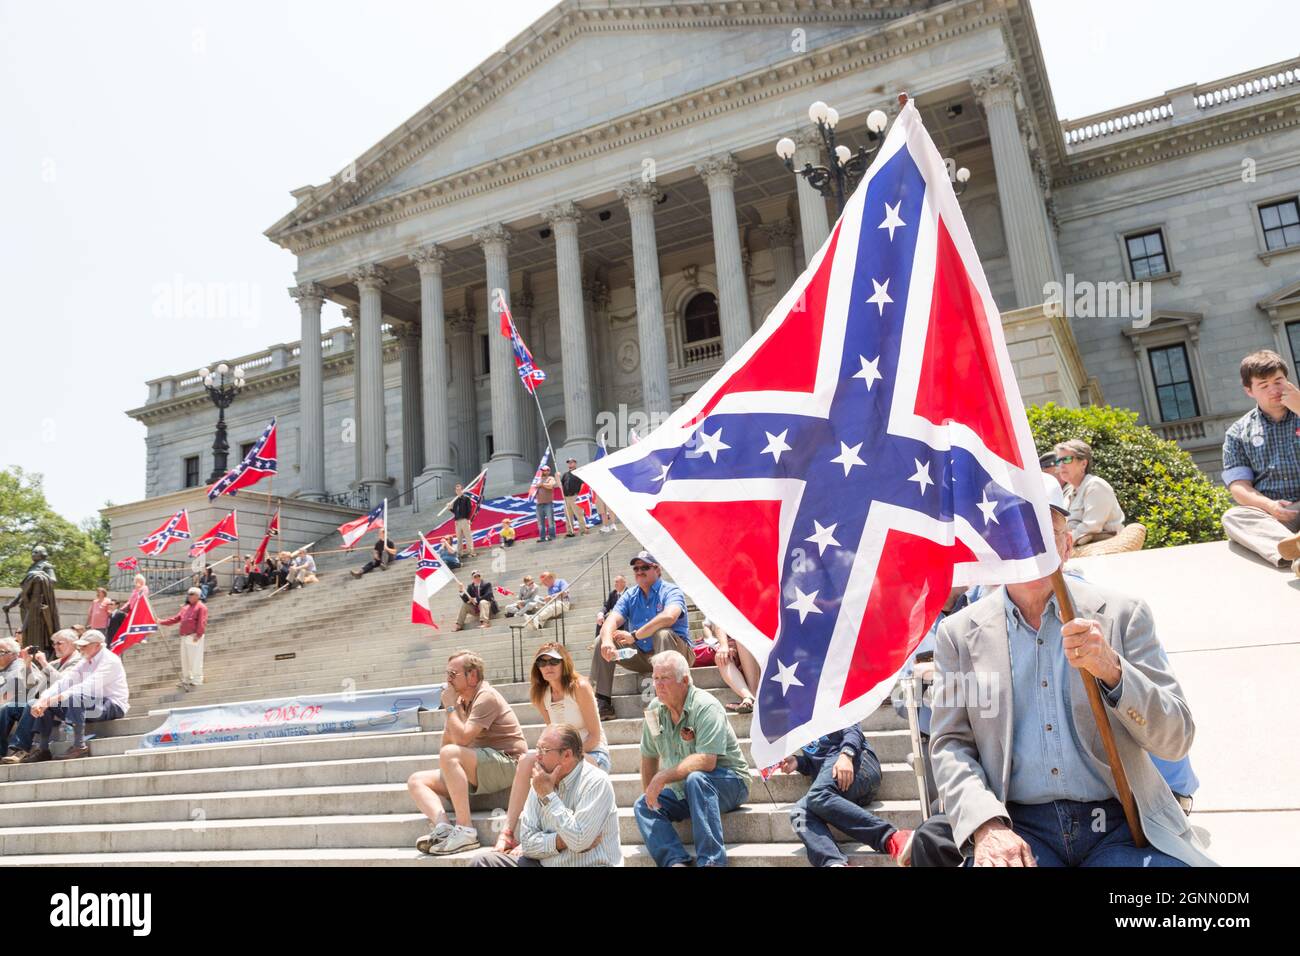 Confederate supporters gather on the steps of the South Carolina capital building waving rebel flags to mark Confederate Memorial Day May 7, 2016 in Columbia, South Carolina. The events marking southern Confederate heritage come nearly a year after the removal of the confederate flag from the capitol following the murder of nine people at the historic black Mother Emanuel AME Church. Stock Photo